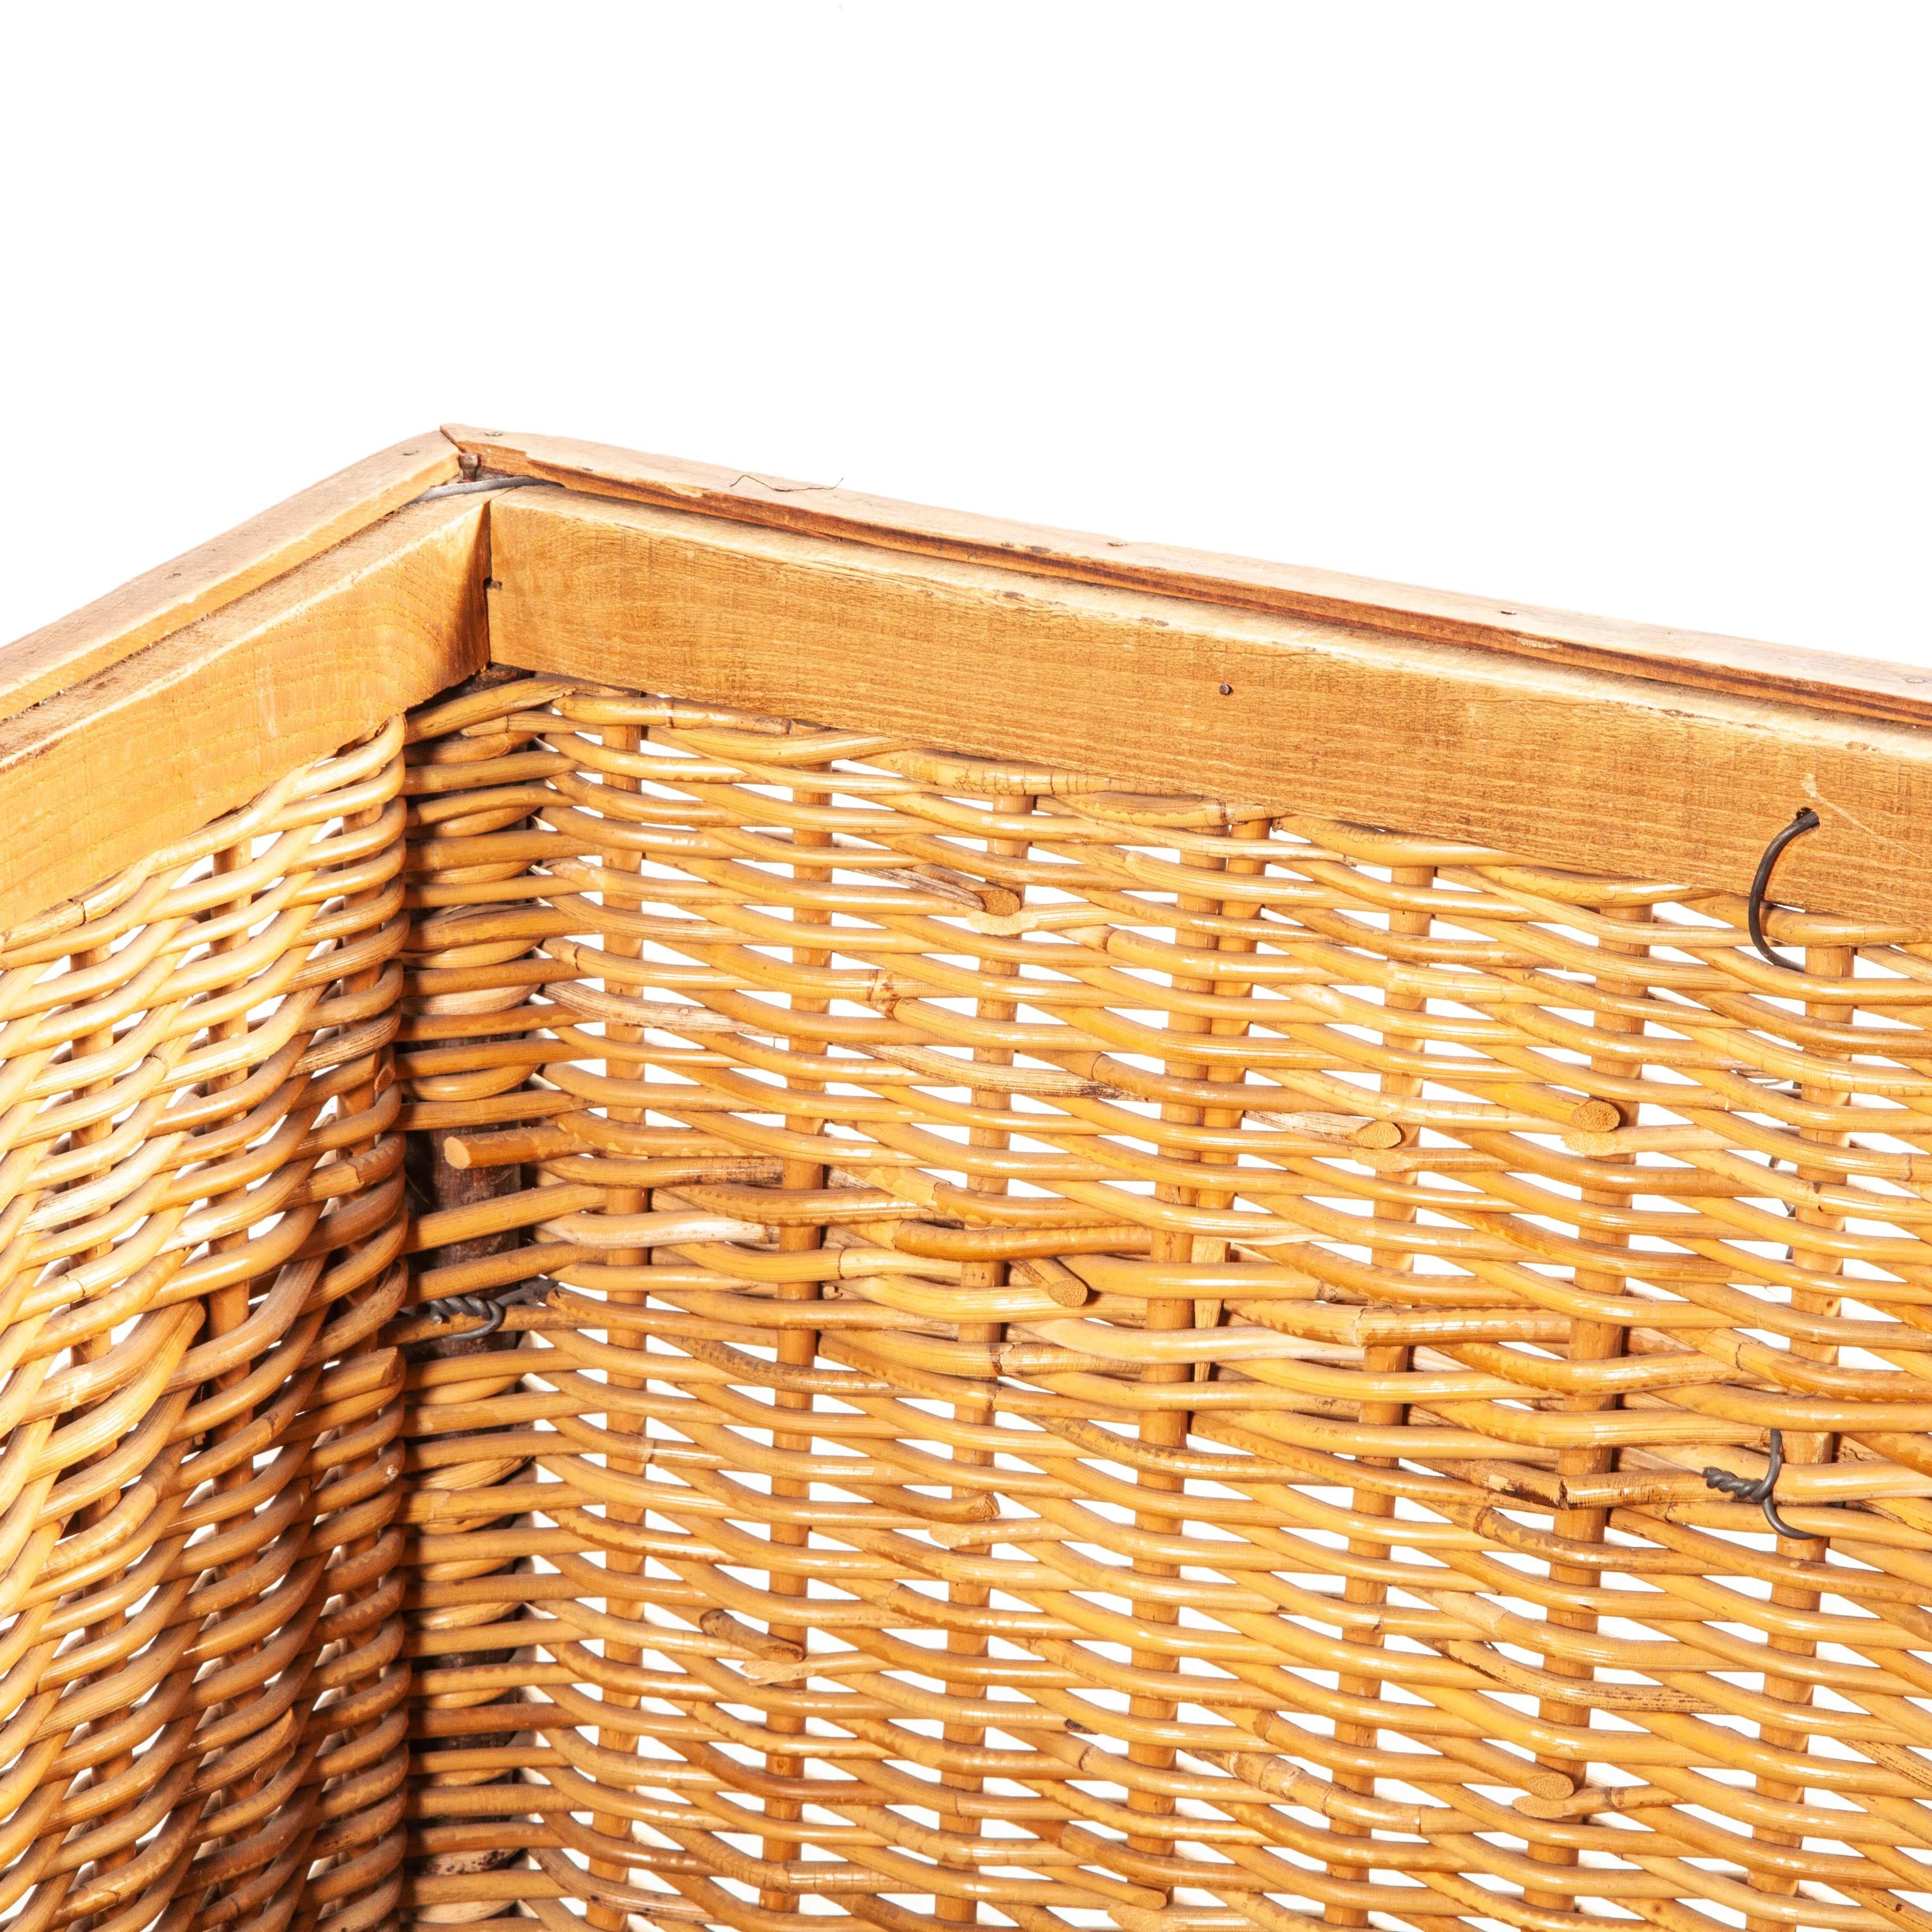 1950s Vintage French Industrial Woven Rattan Trolley, Storage Basket 1